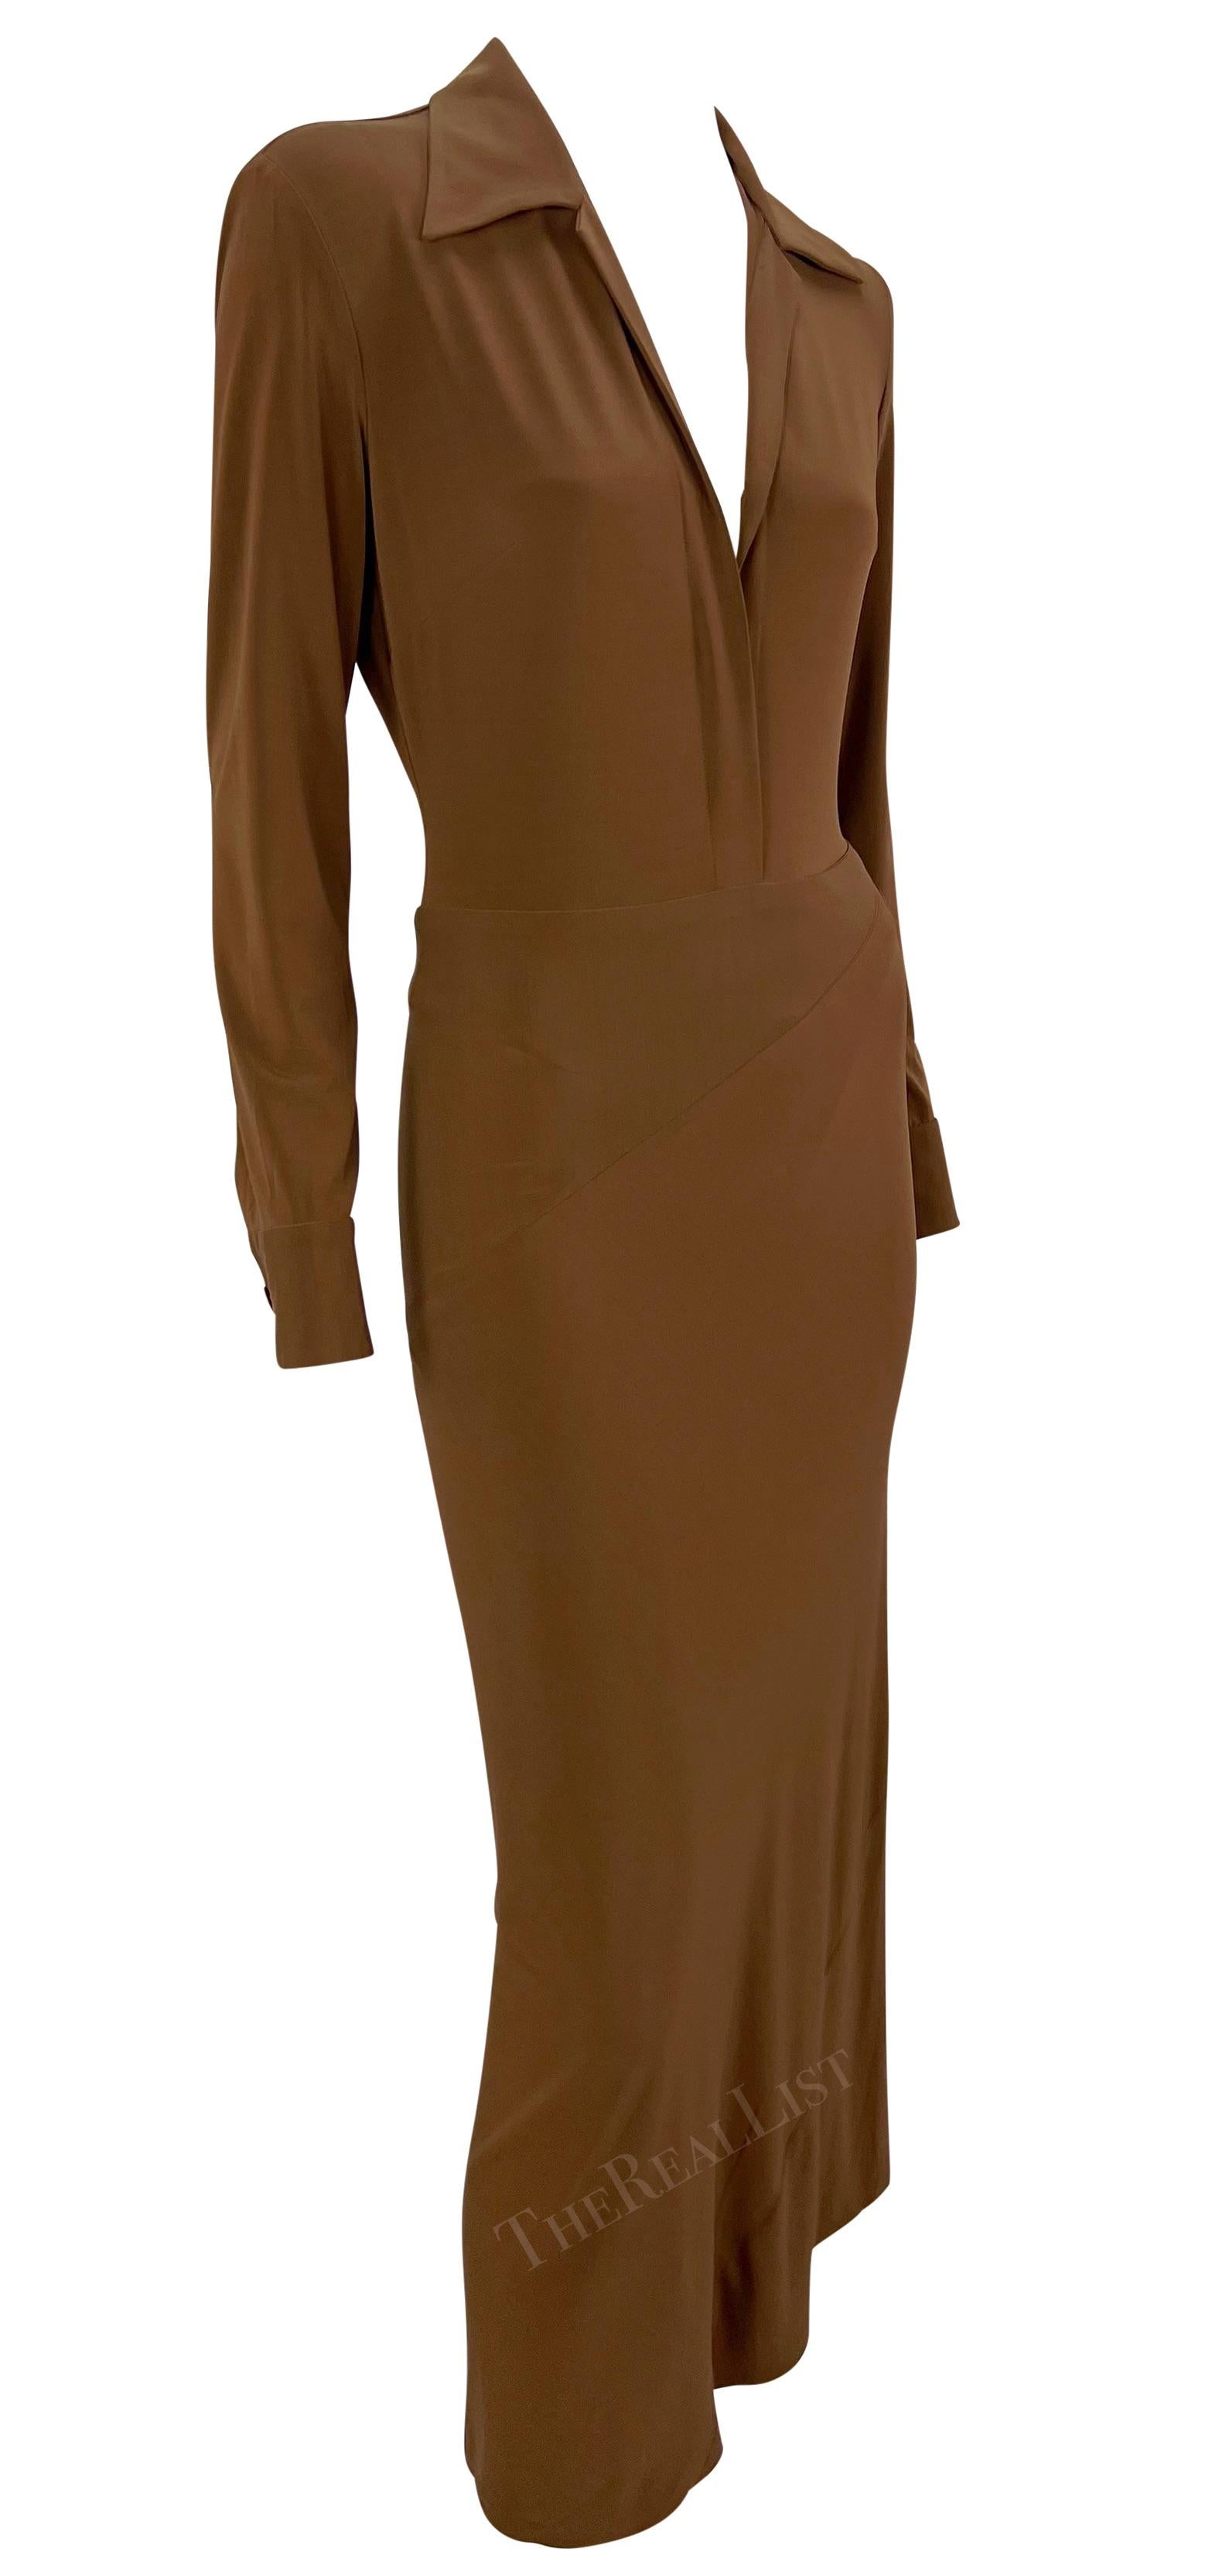 S/S 1996 Donna Karan Runway Light Brown Plunging Bodycon Dress For Sale 1